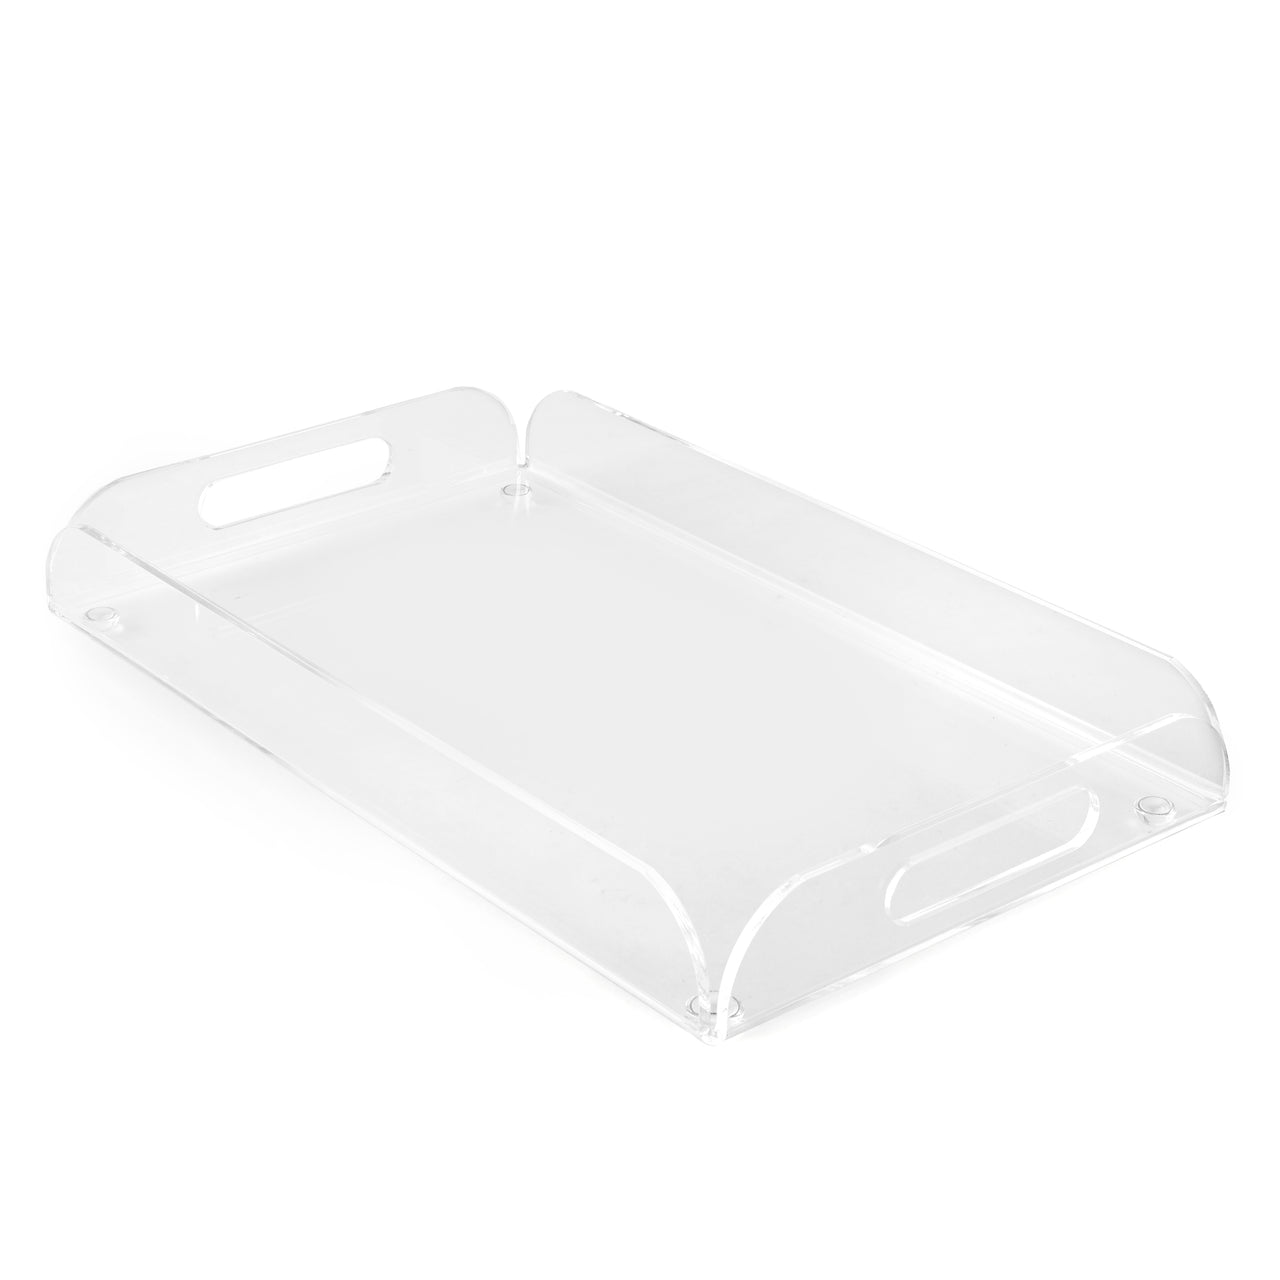 #1 serving tray